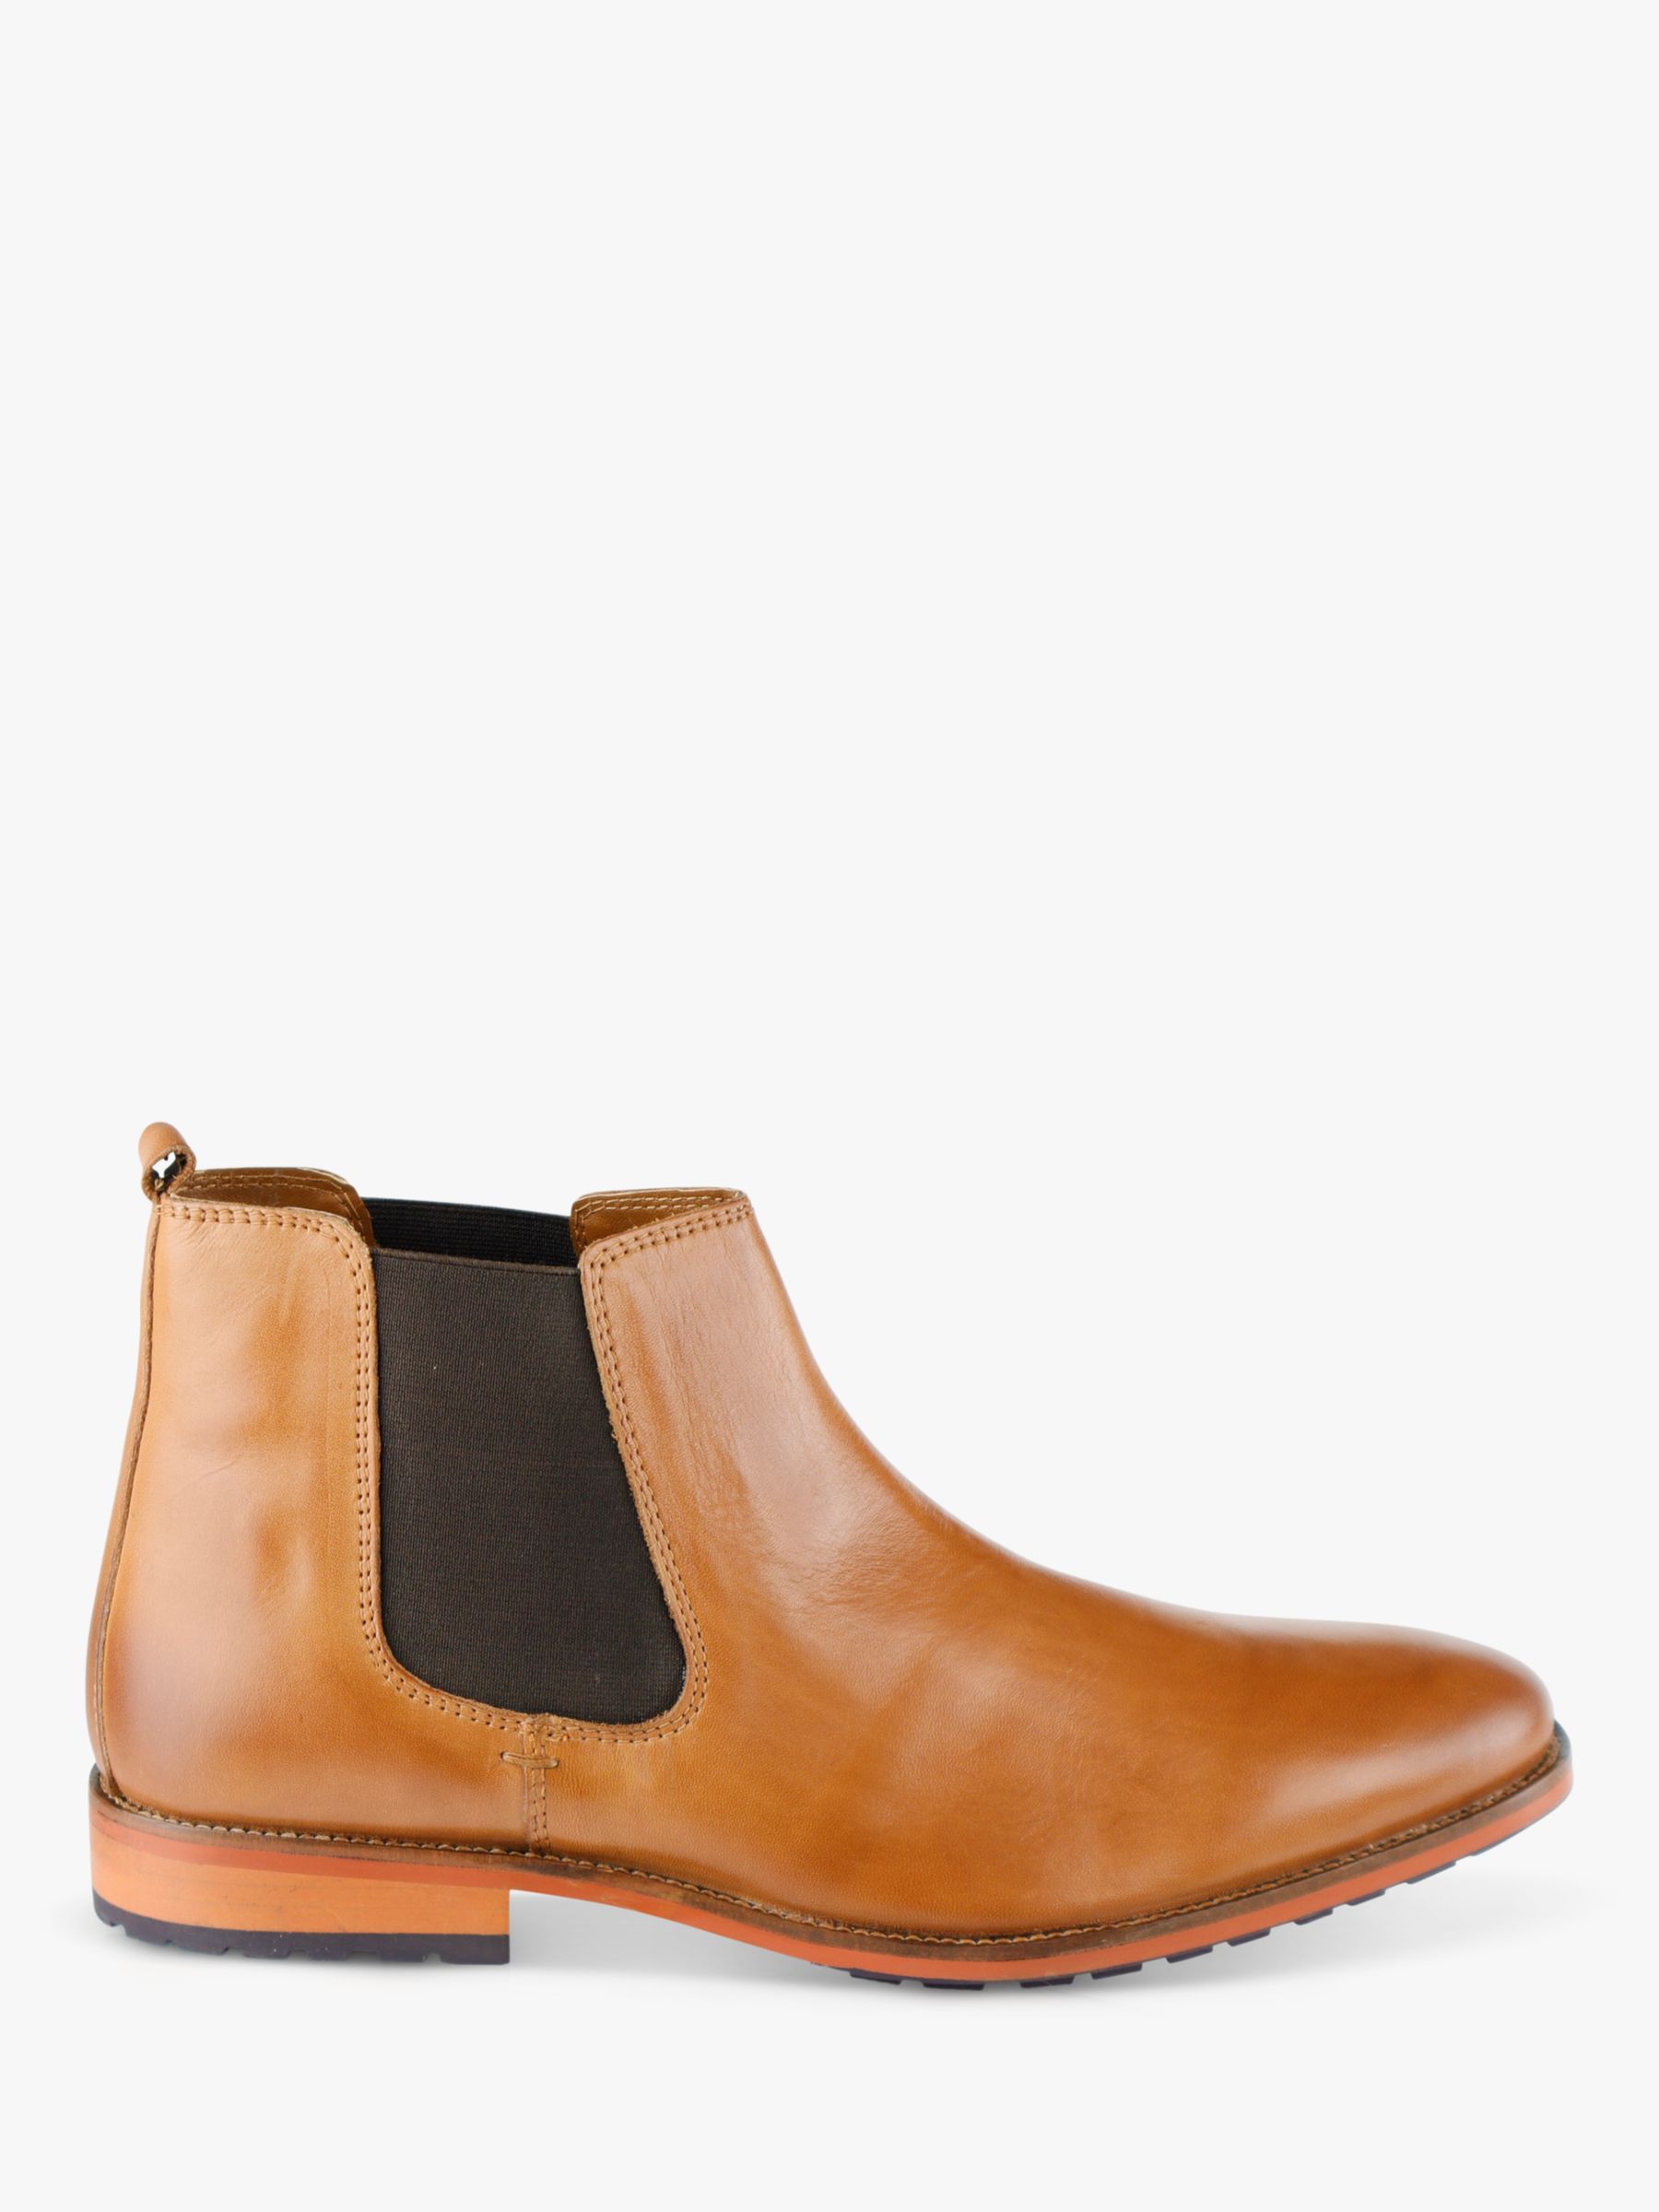 Silver Street London Argyll Leather Chelsea Boots, Tan, 7